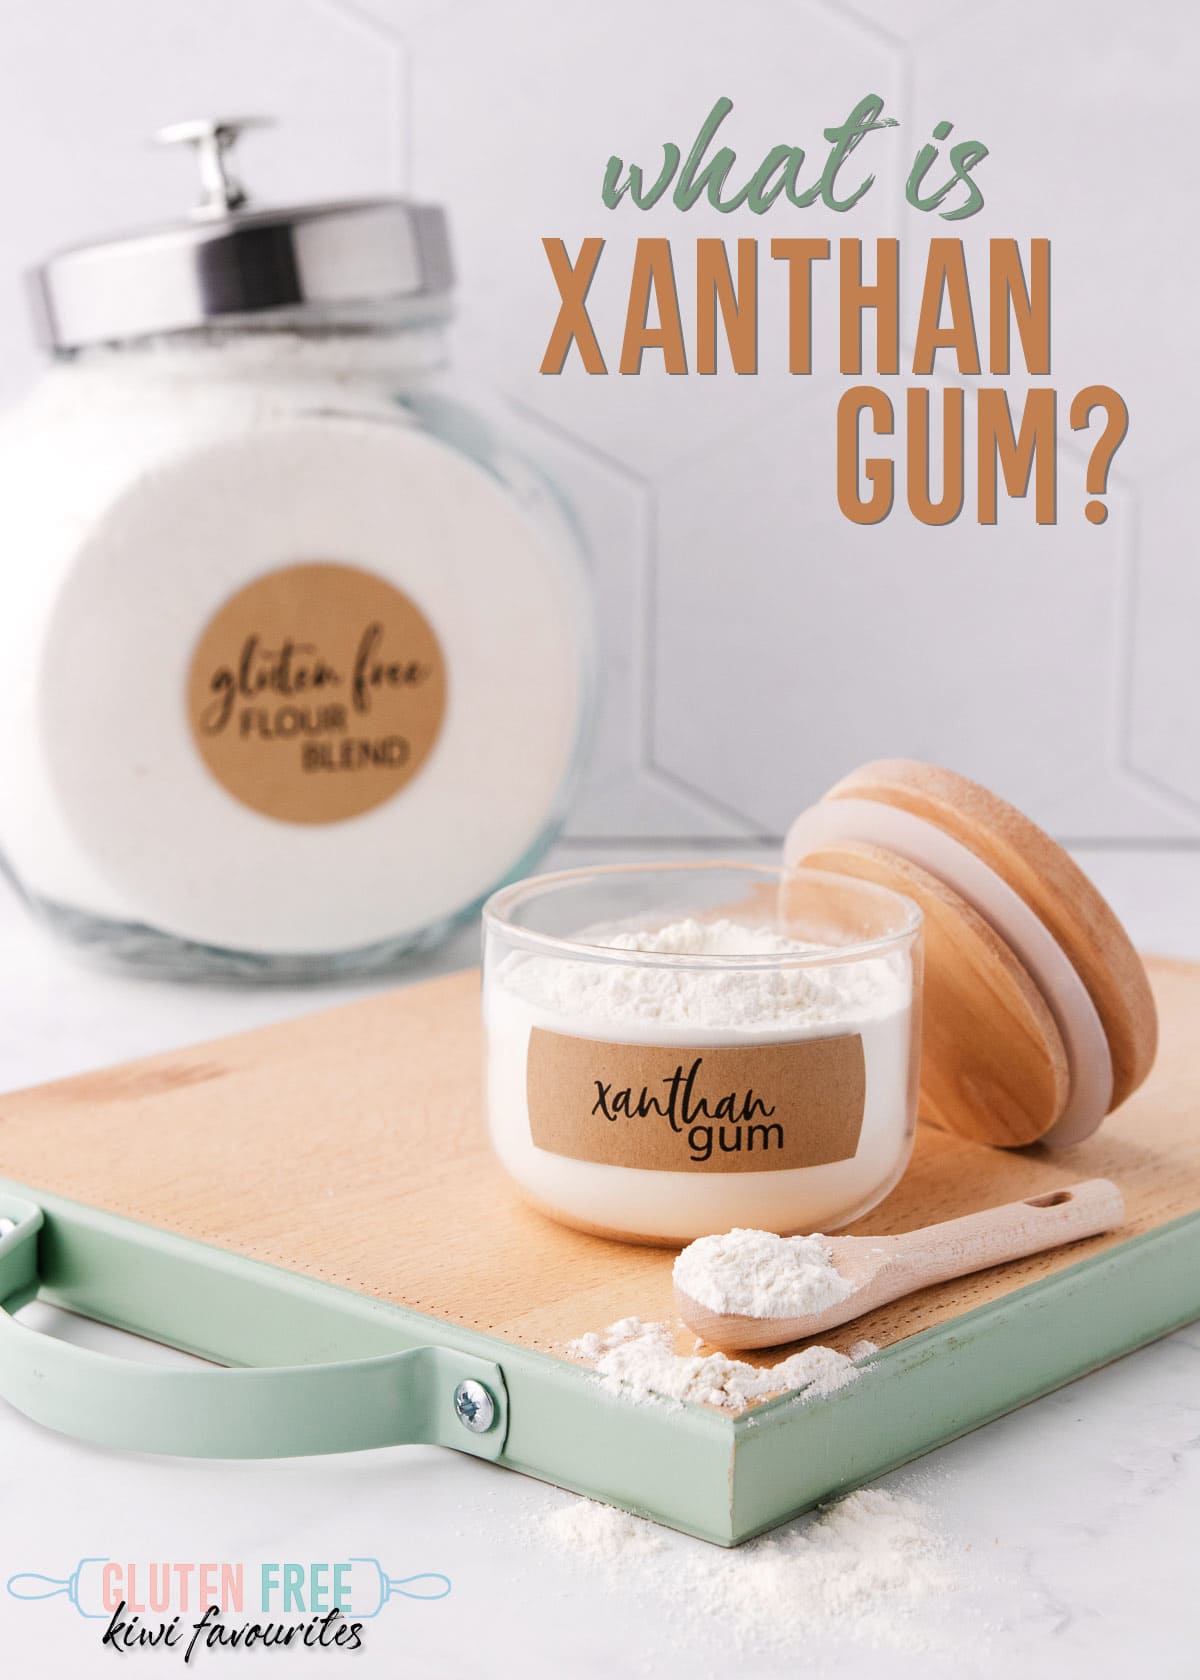 A small jar of xanthan gum, with a jar of gluten free flour in the background, text reads "what is xanthan gum?".